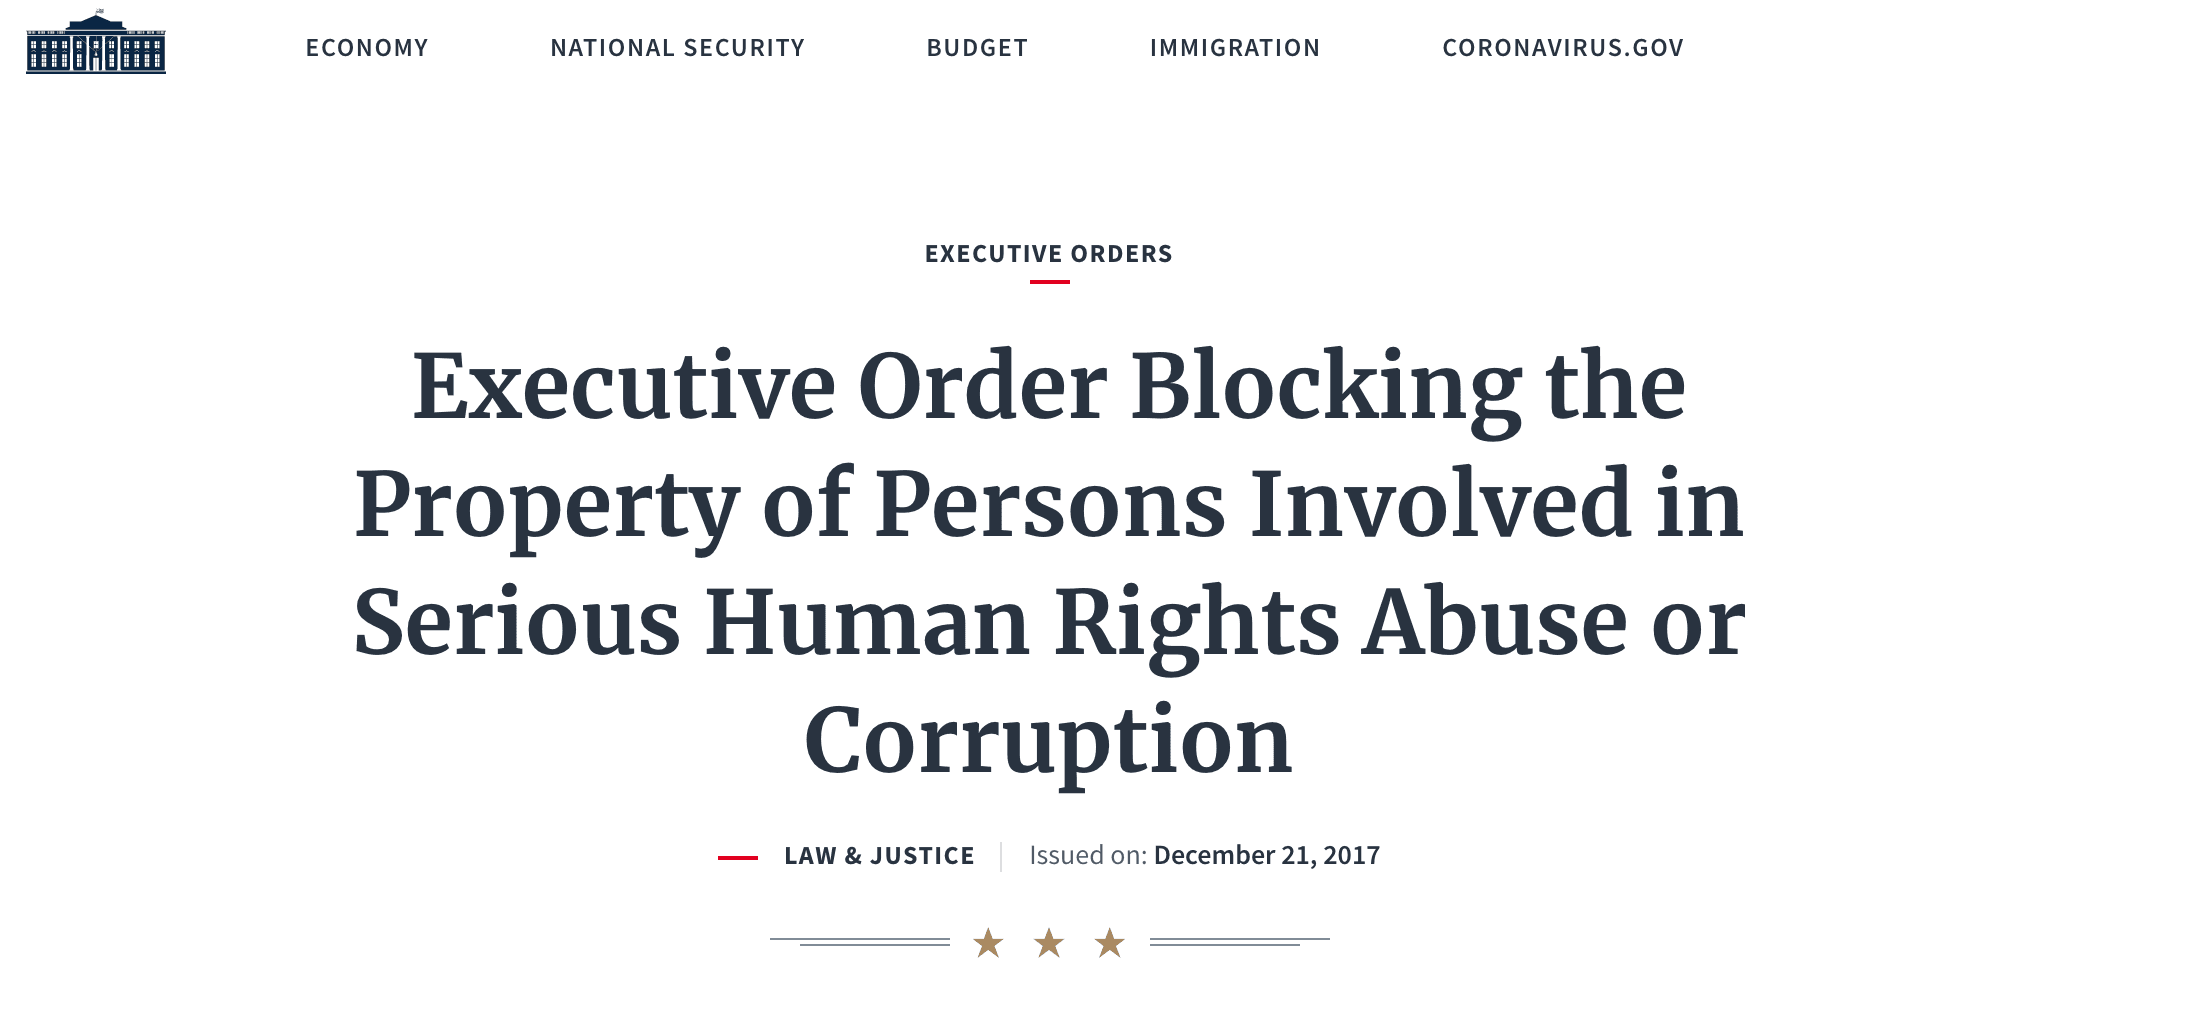 President Trump Executive Order Blocking Property of Persons Involved in Serious Human Rights Abuse Corruption December 2017